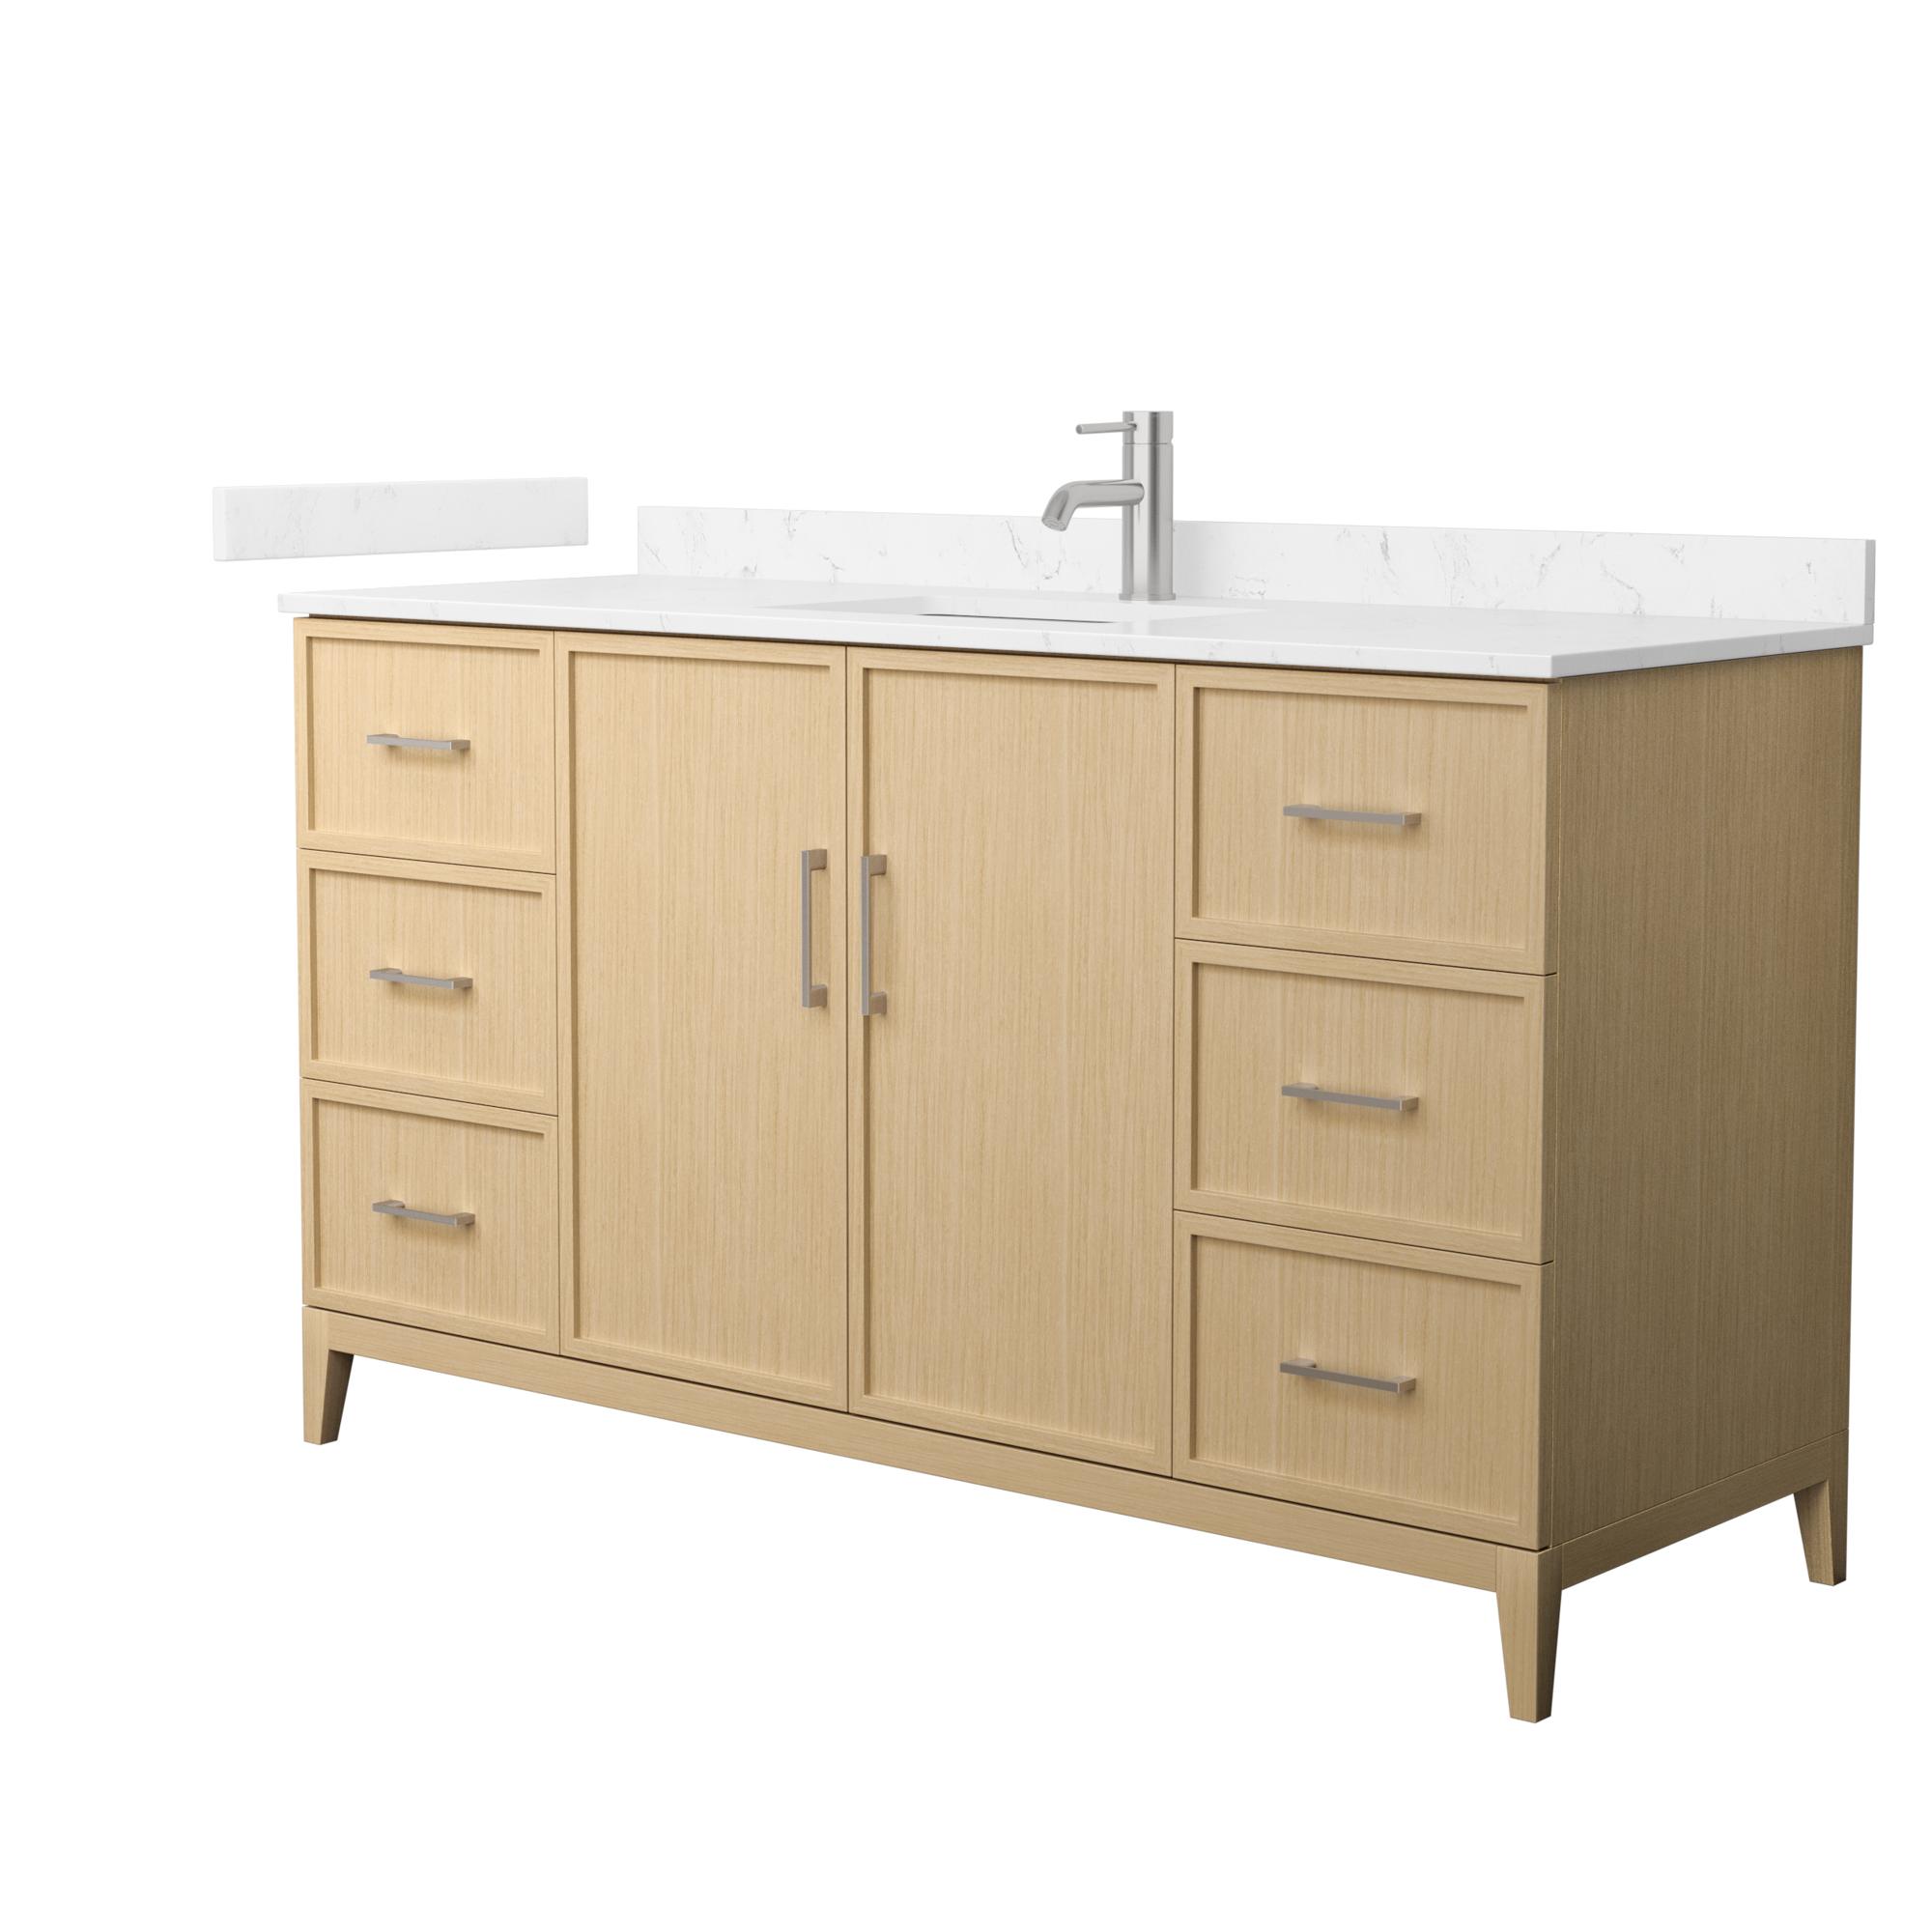 60" Transitional Single Vanity Base in White Oak, 7 Top Options with 2 Hardware Option